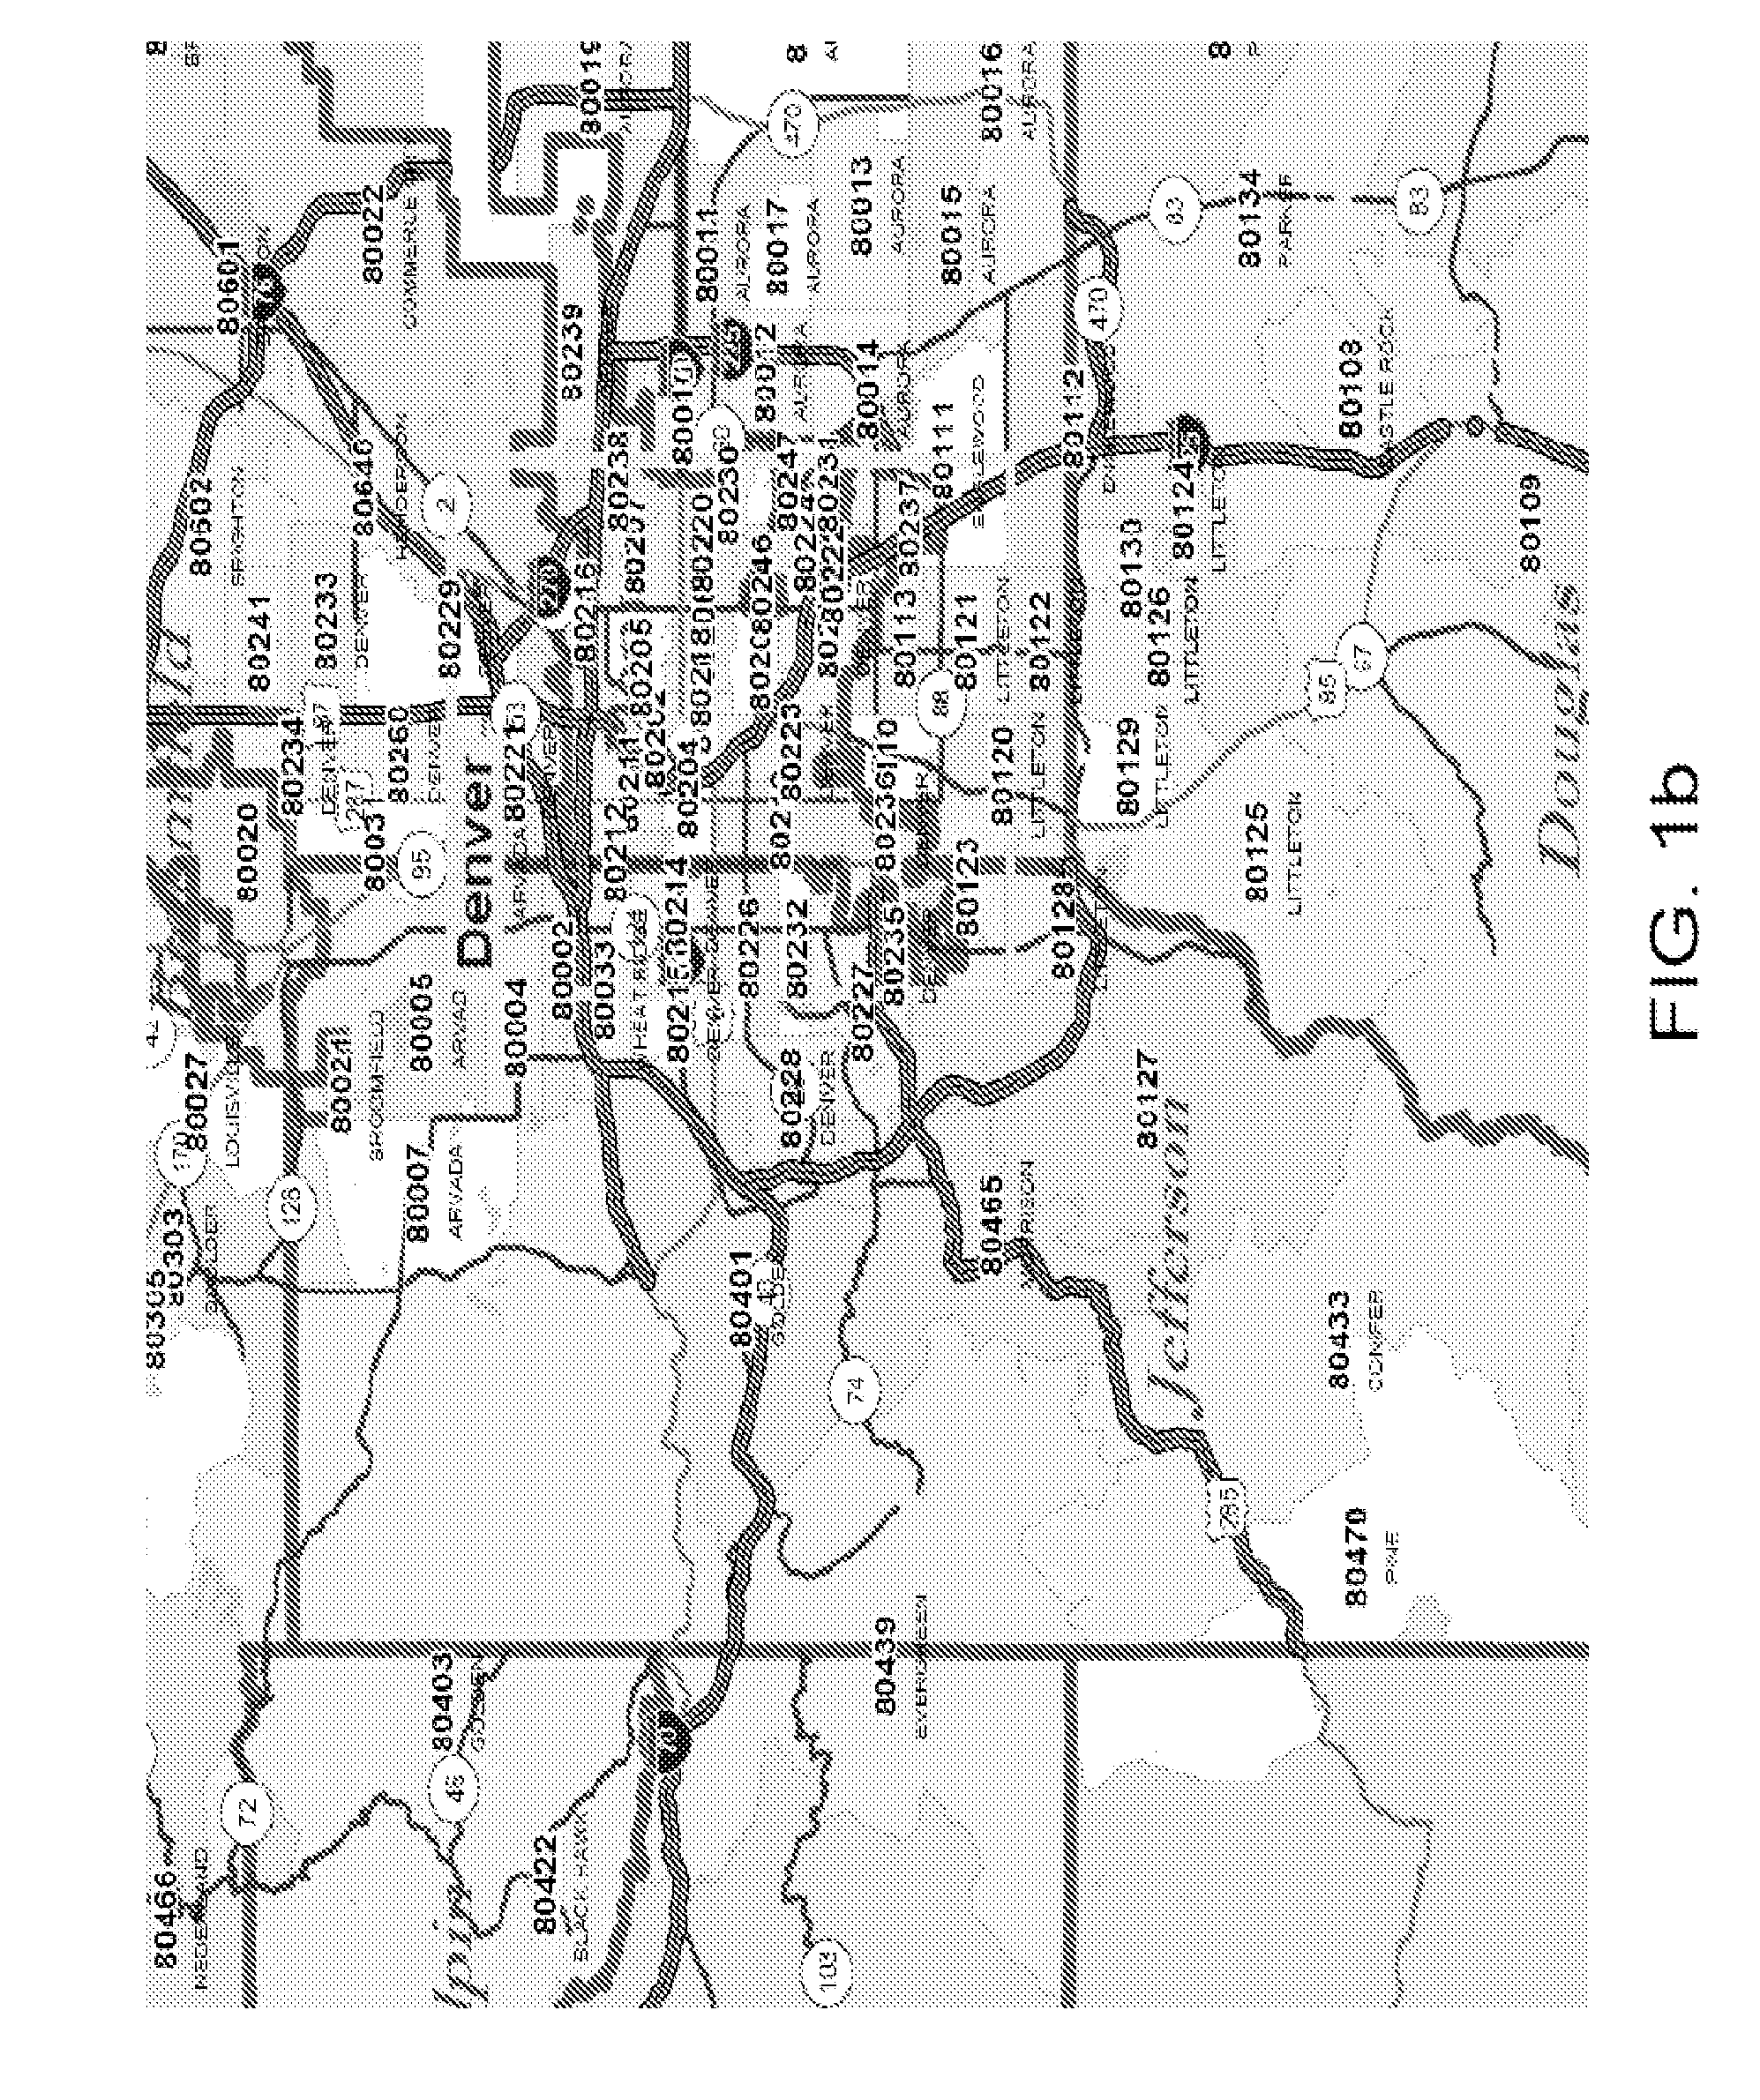 Method and Apparatus of Transmitting, Receiving, Displaying and Playing Weather Data